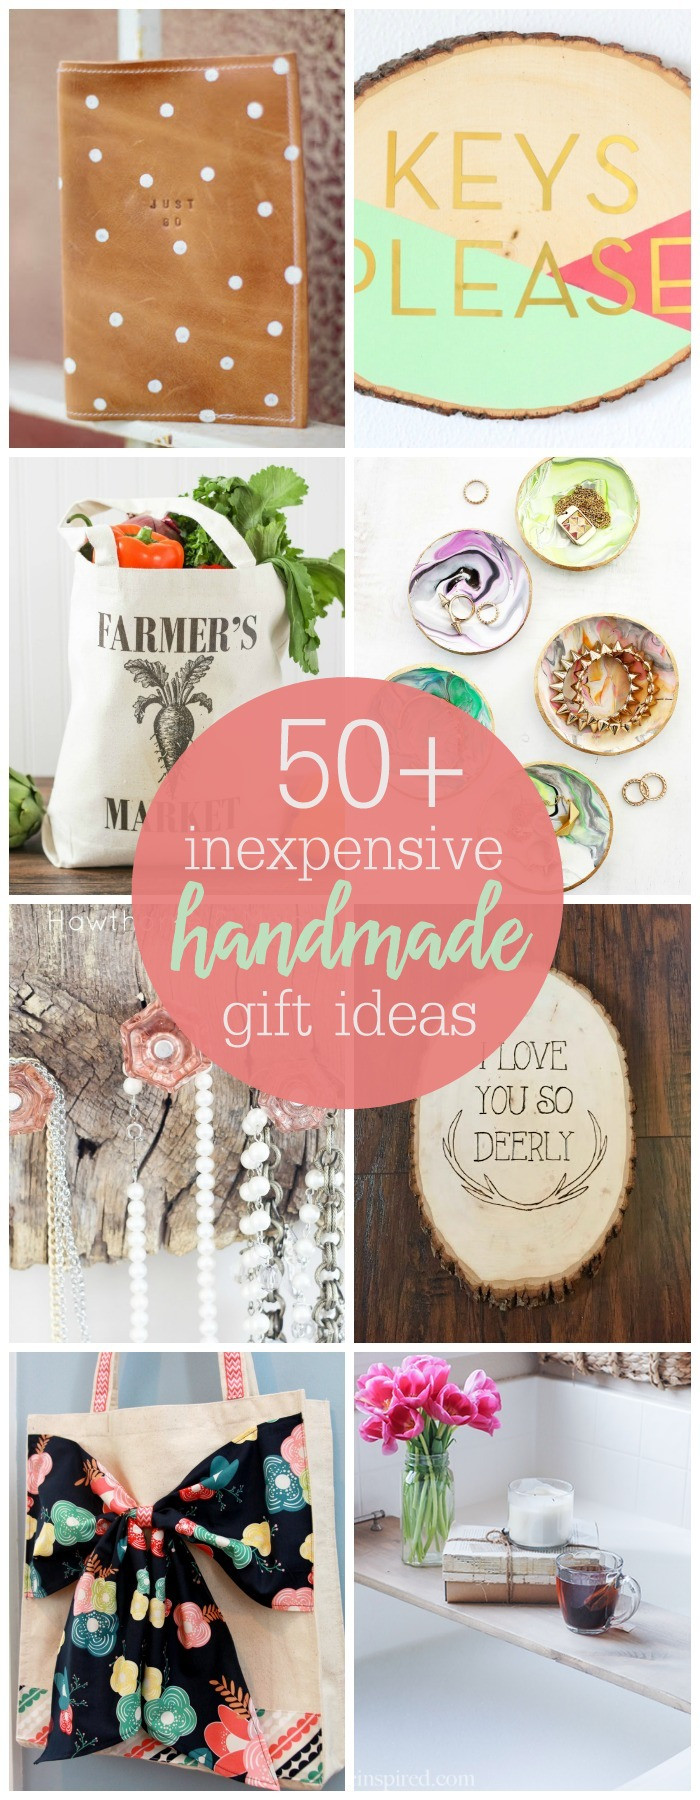 DIY Christmas Presents For Friends
 Inexpensive Handmade Gift Ideas